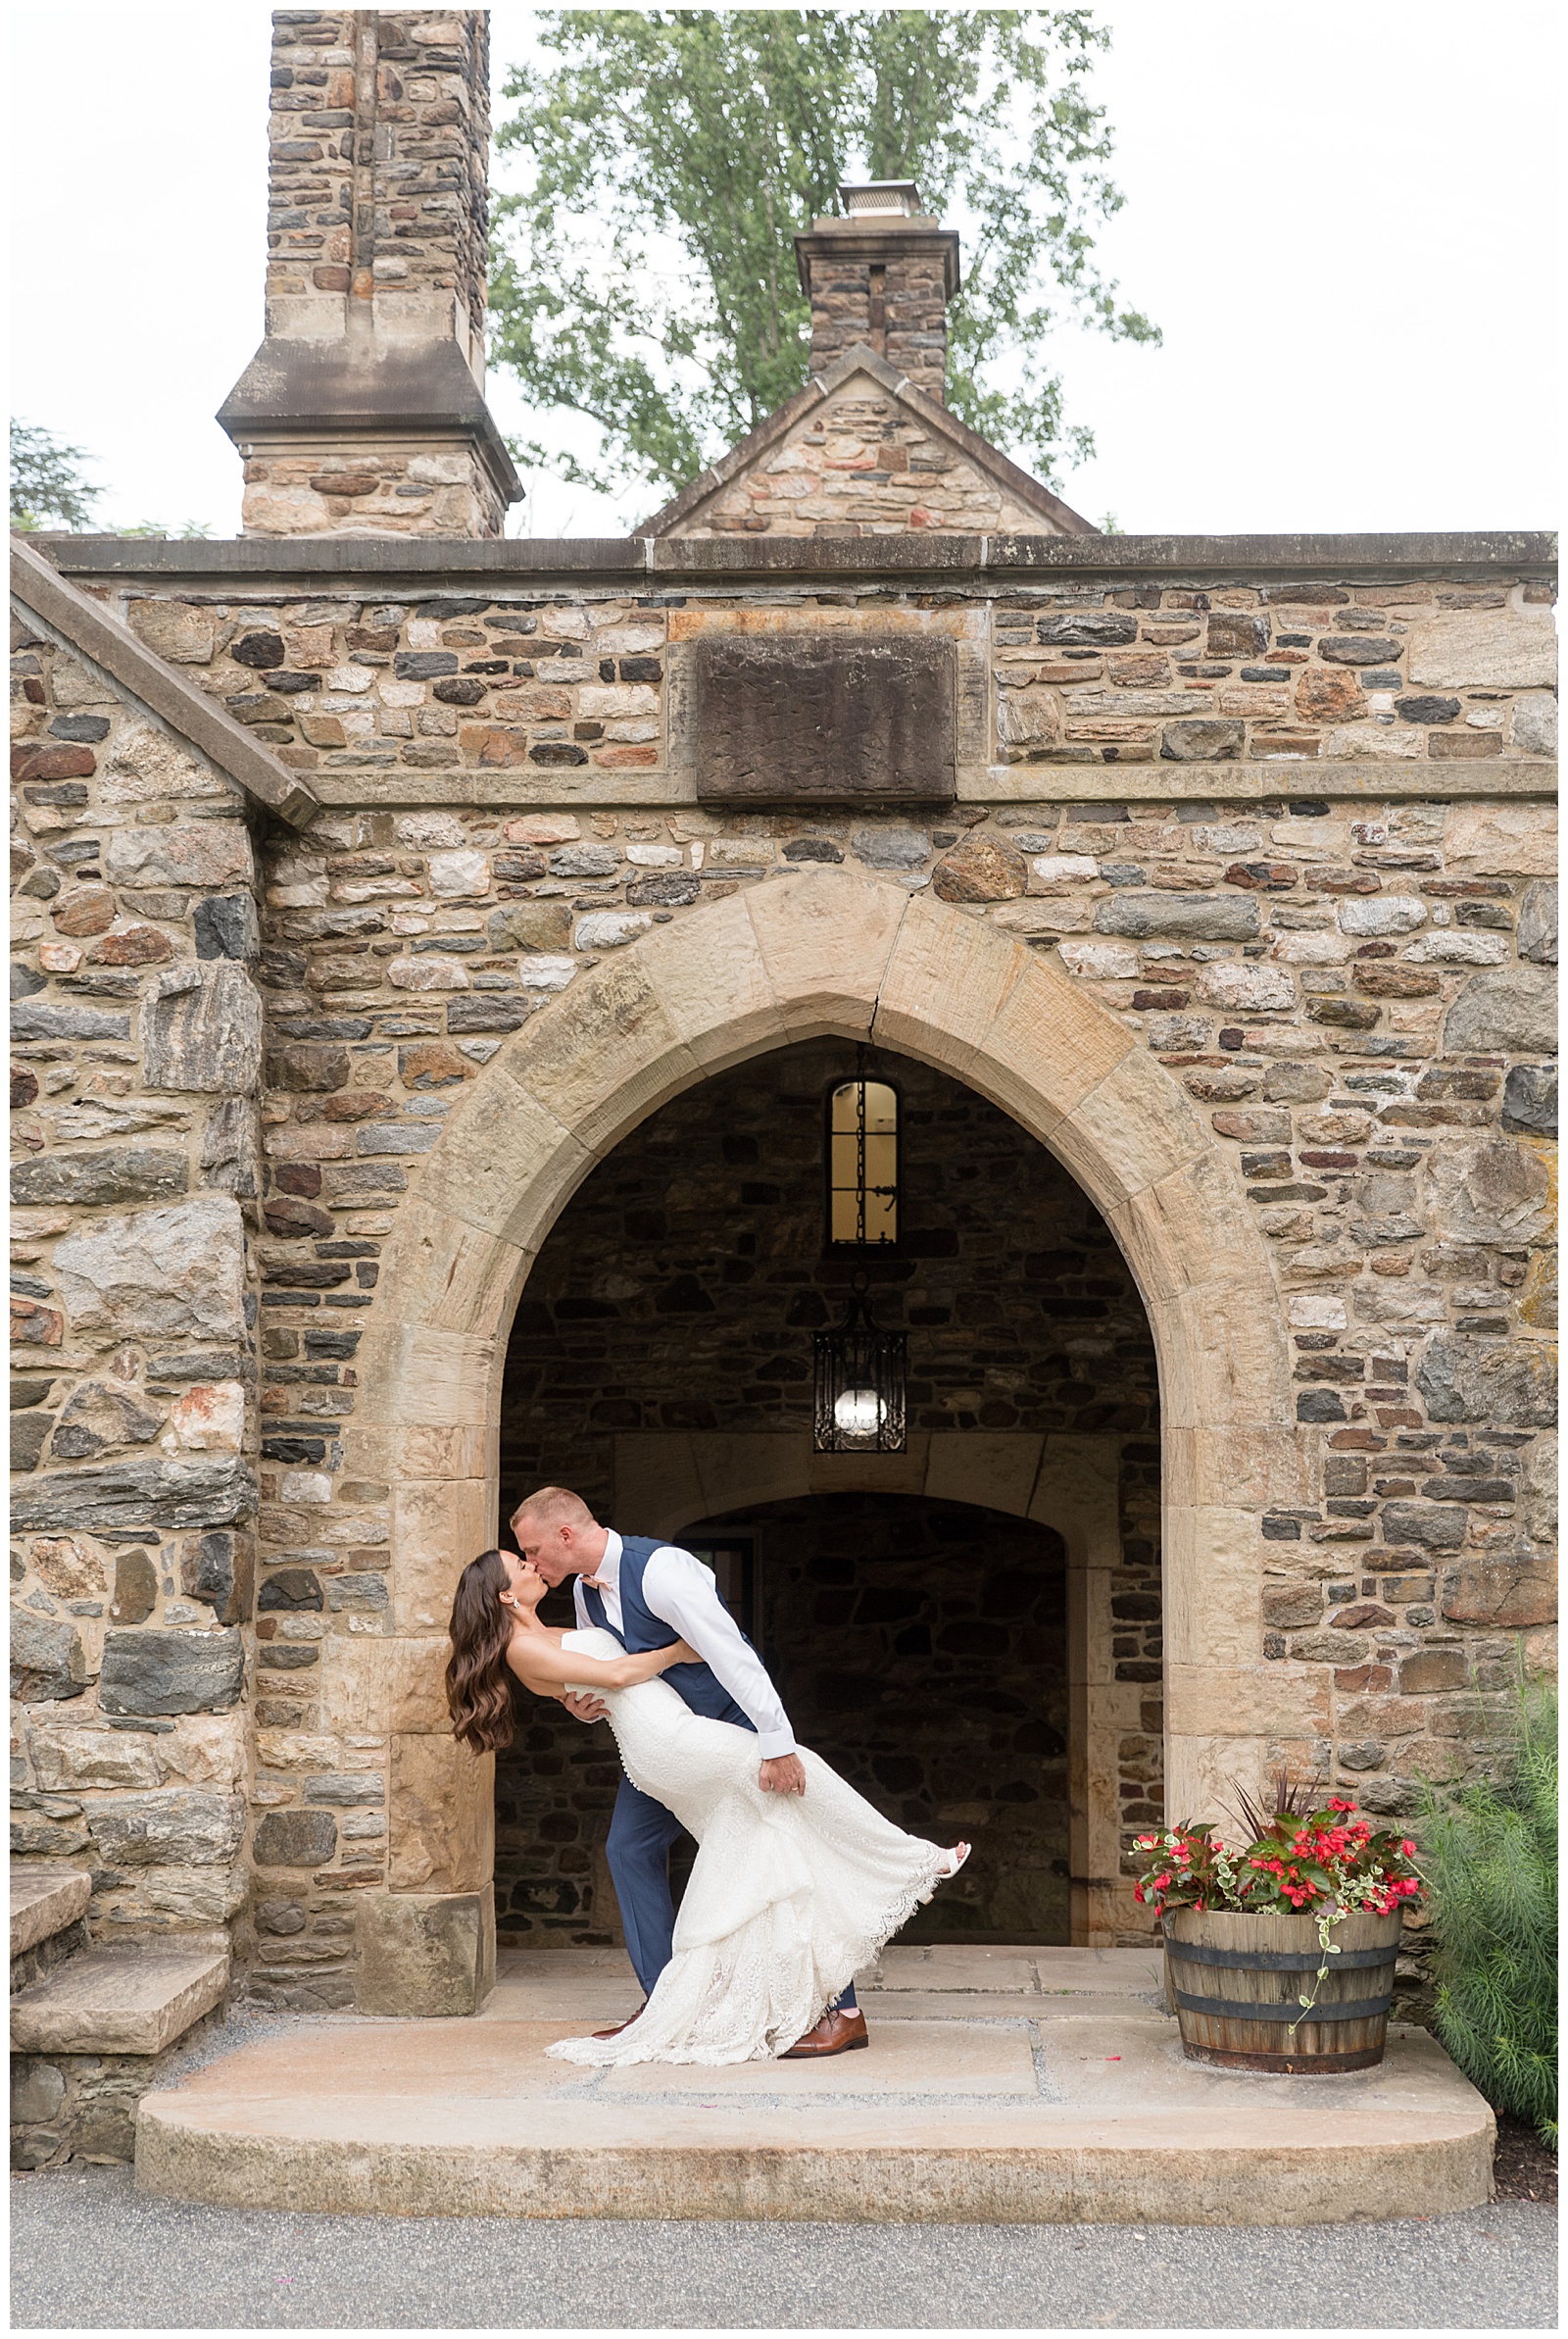 groom dipping his bride back as they kiss by historic stone building at parque ridley creek wedding